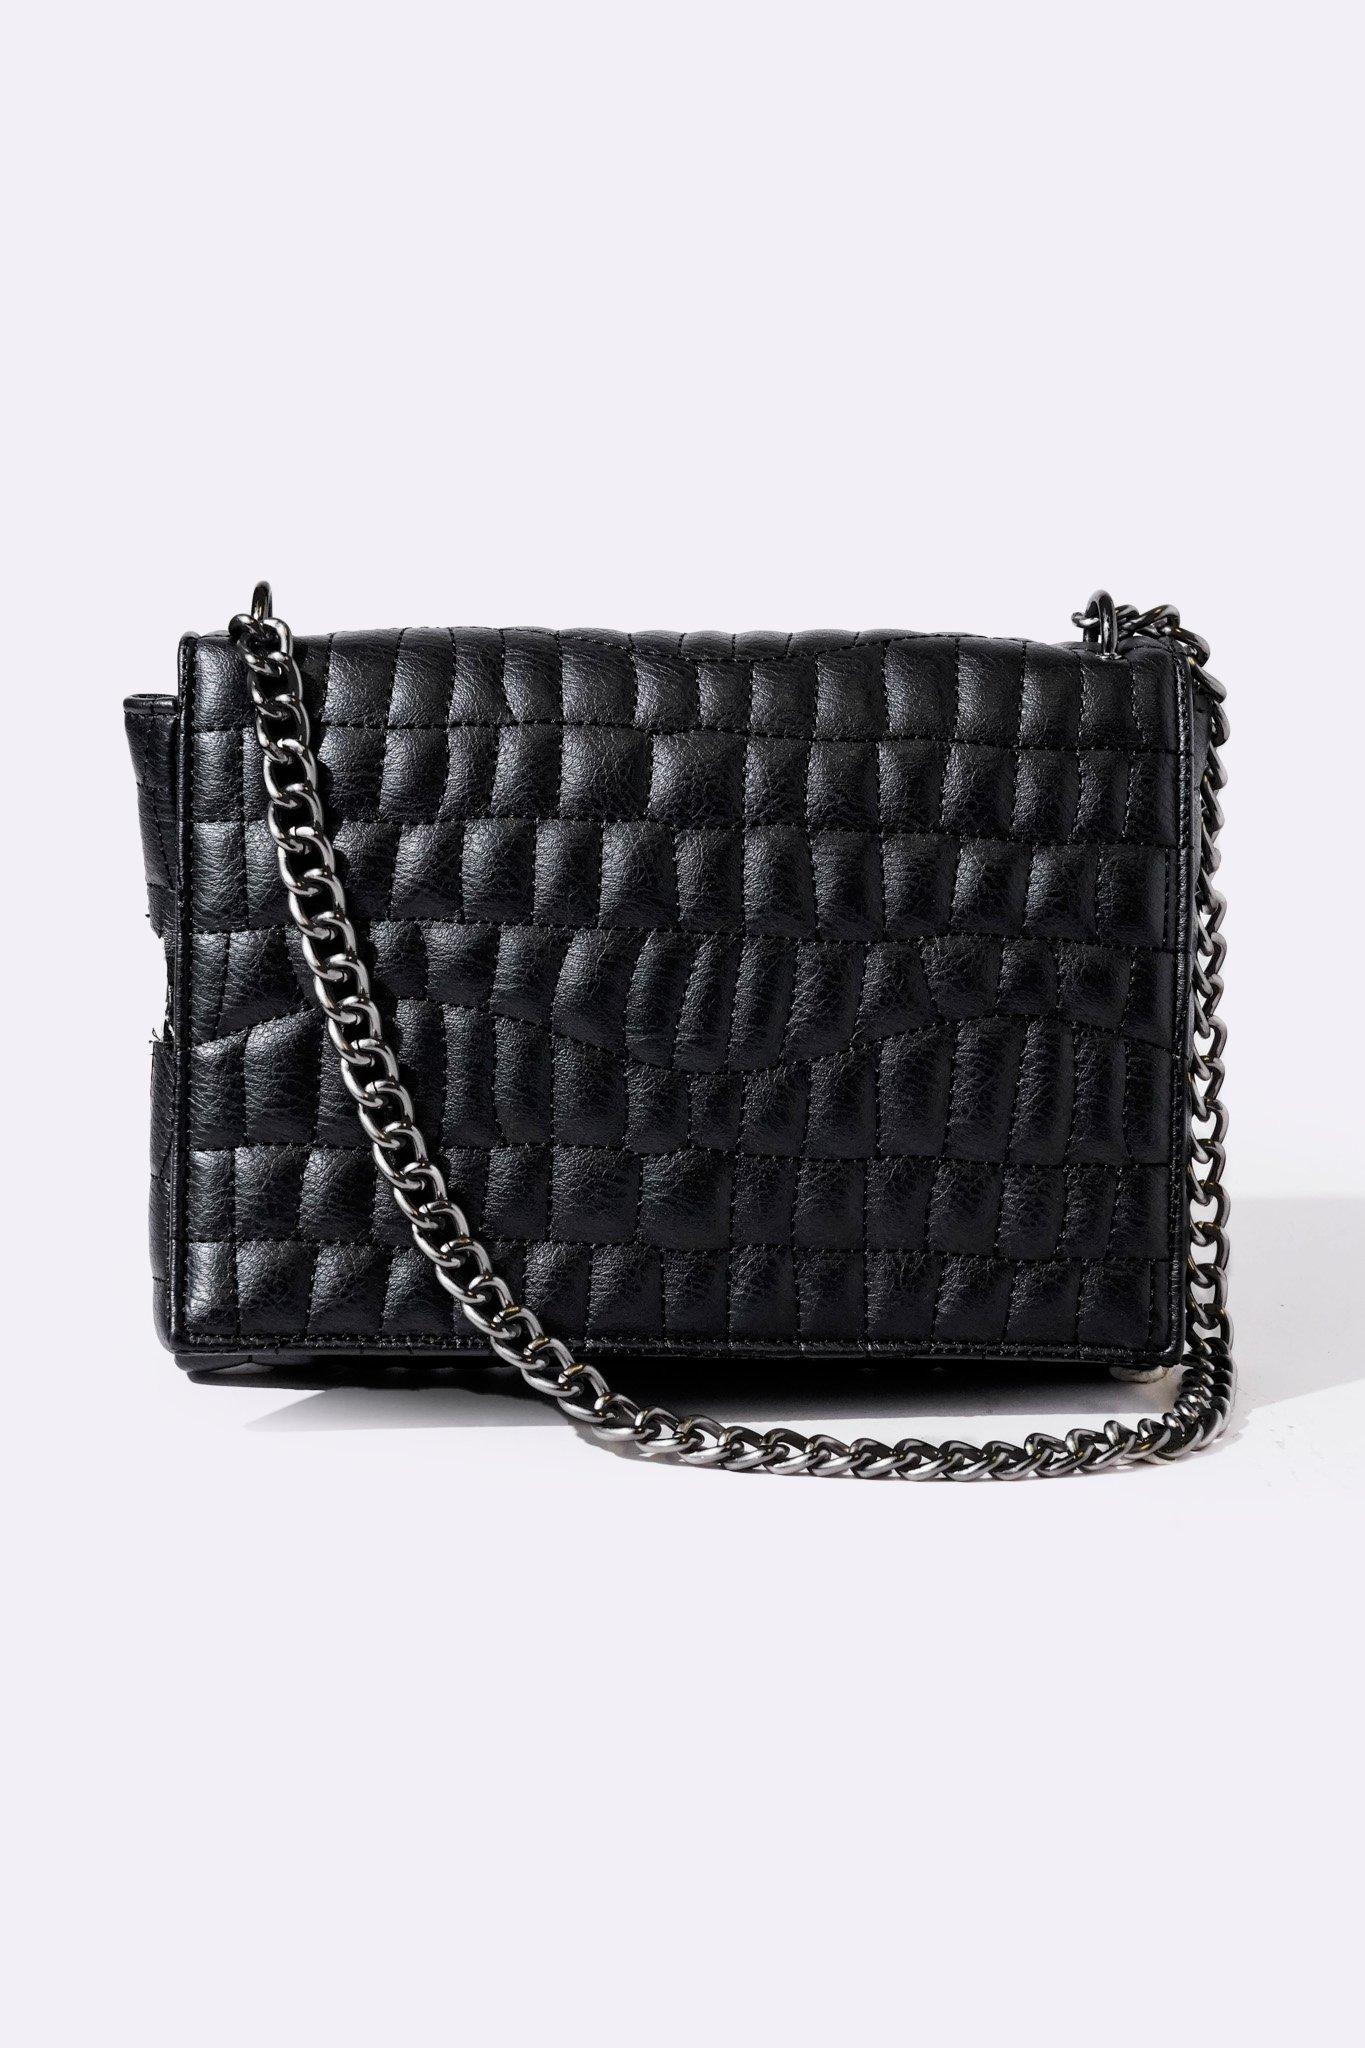 Quilted Clutch Bag